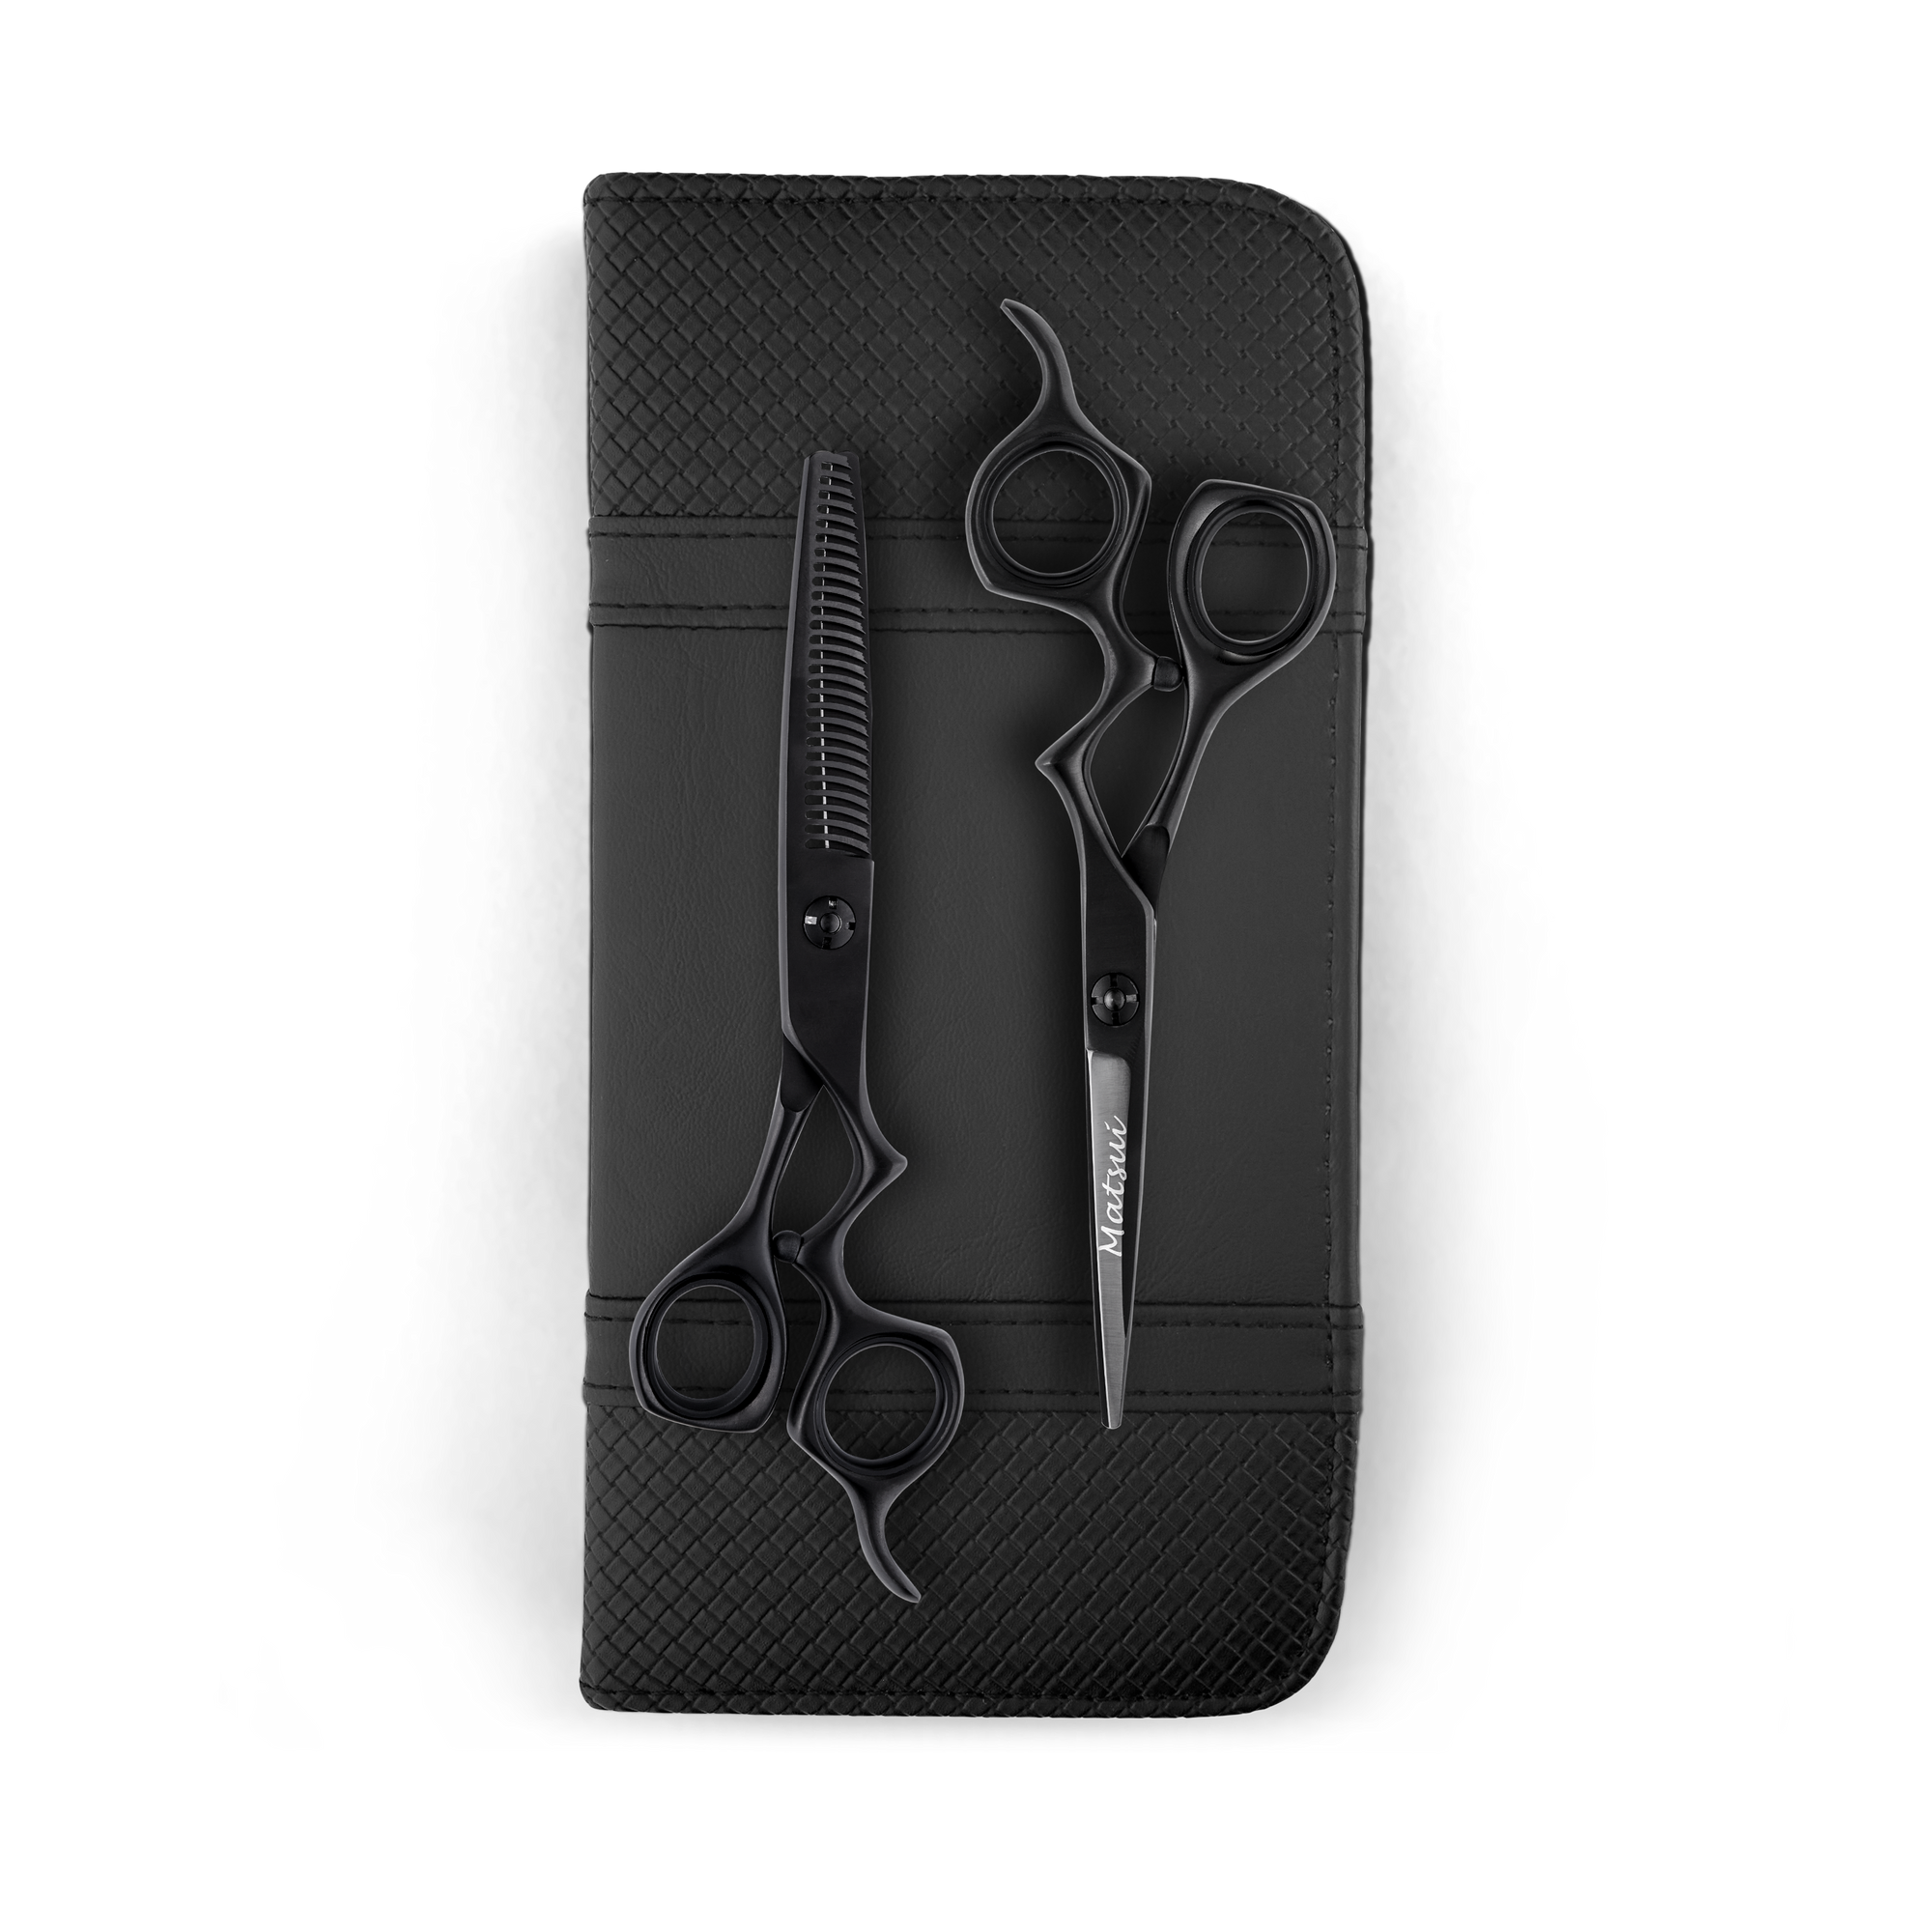 Try our professional hairdressing scissors - Leader